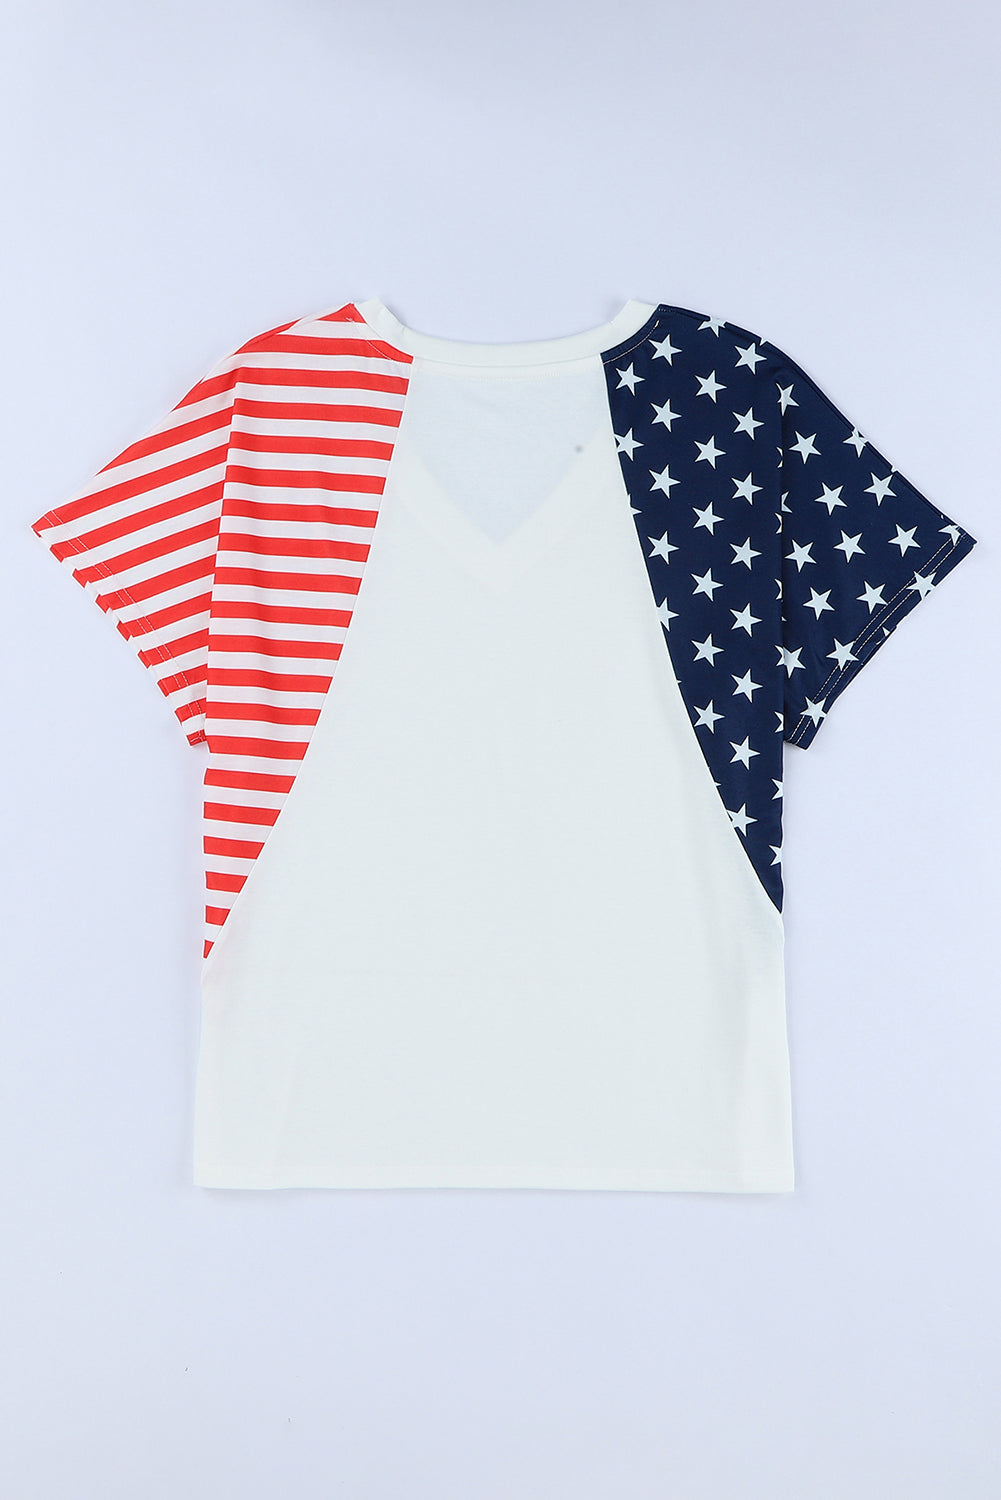 MADE IN AMERICA Stars and Stripes V-Neck Tee Shirt